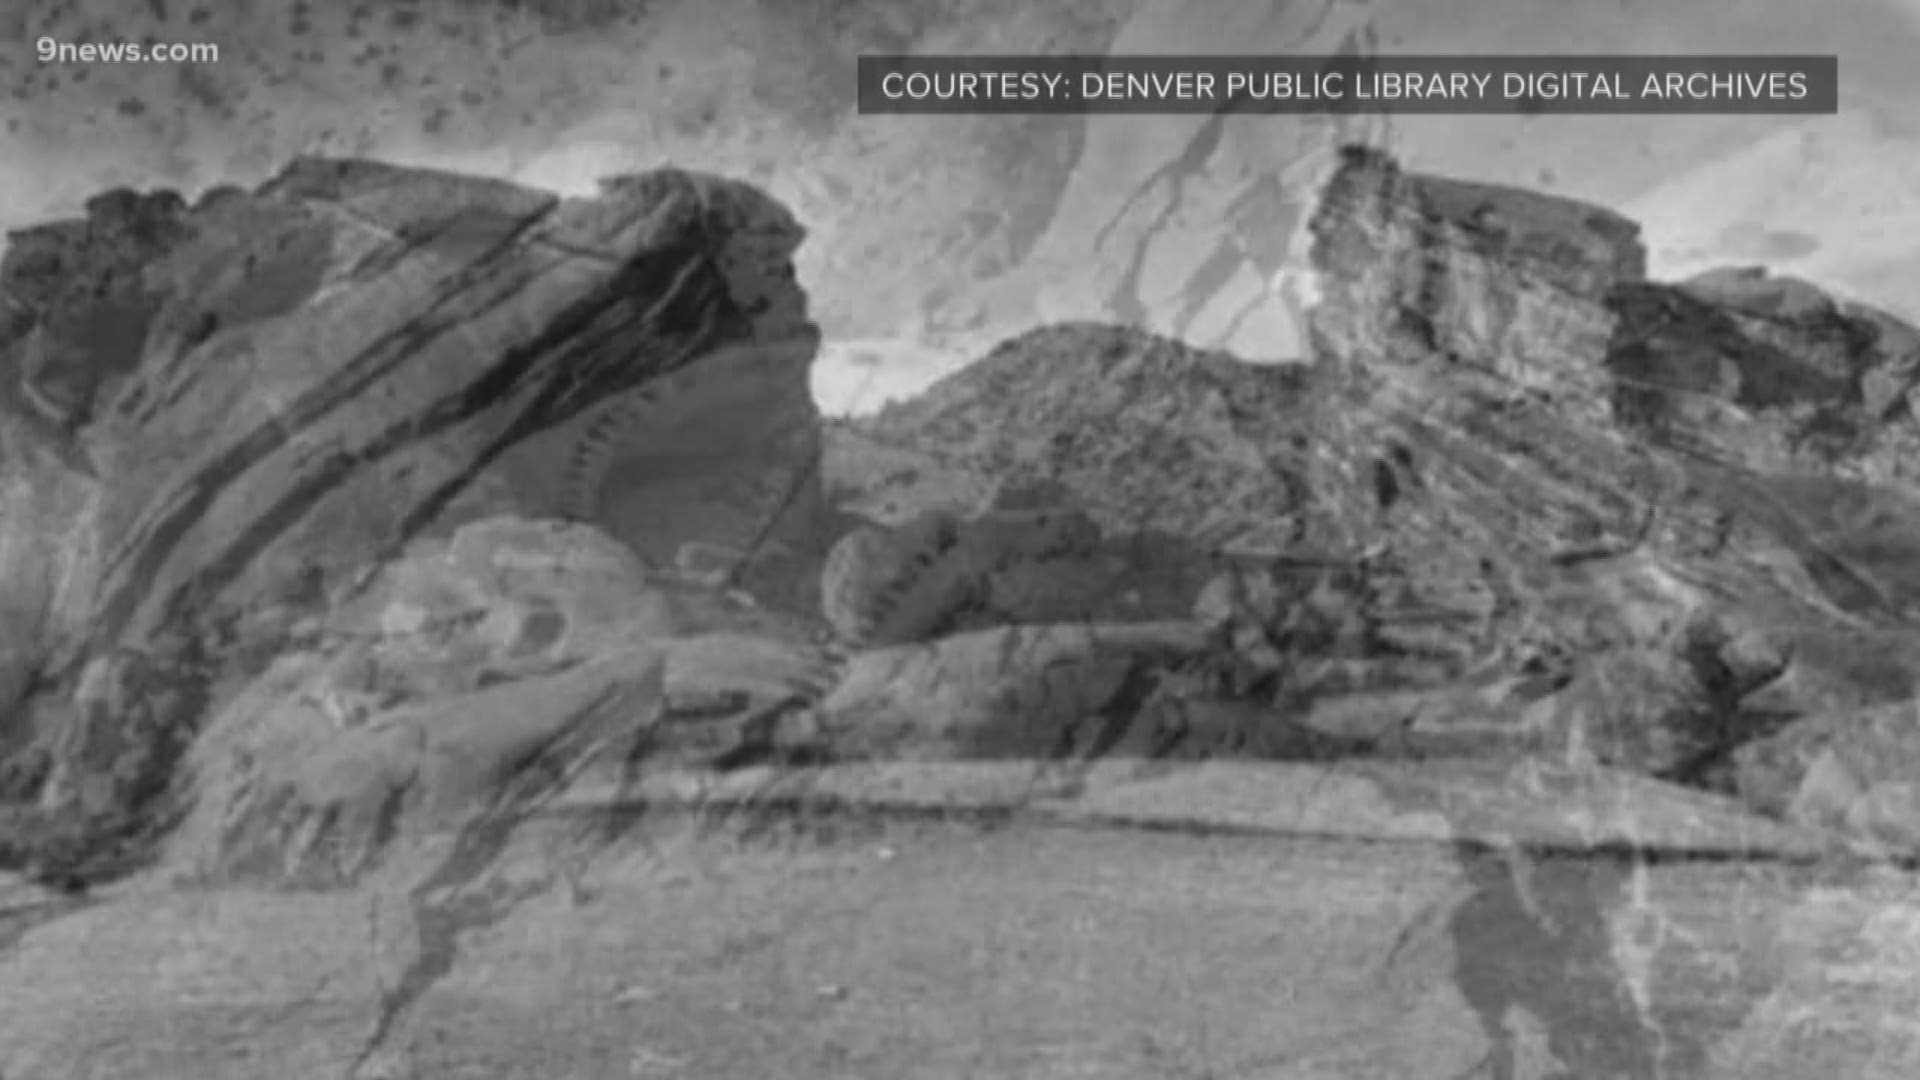 Historical photos from the Denver Public Library show what Red Rocks looked like before it became Colorado's favorite place to see a show.